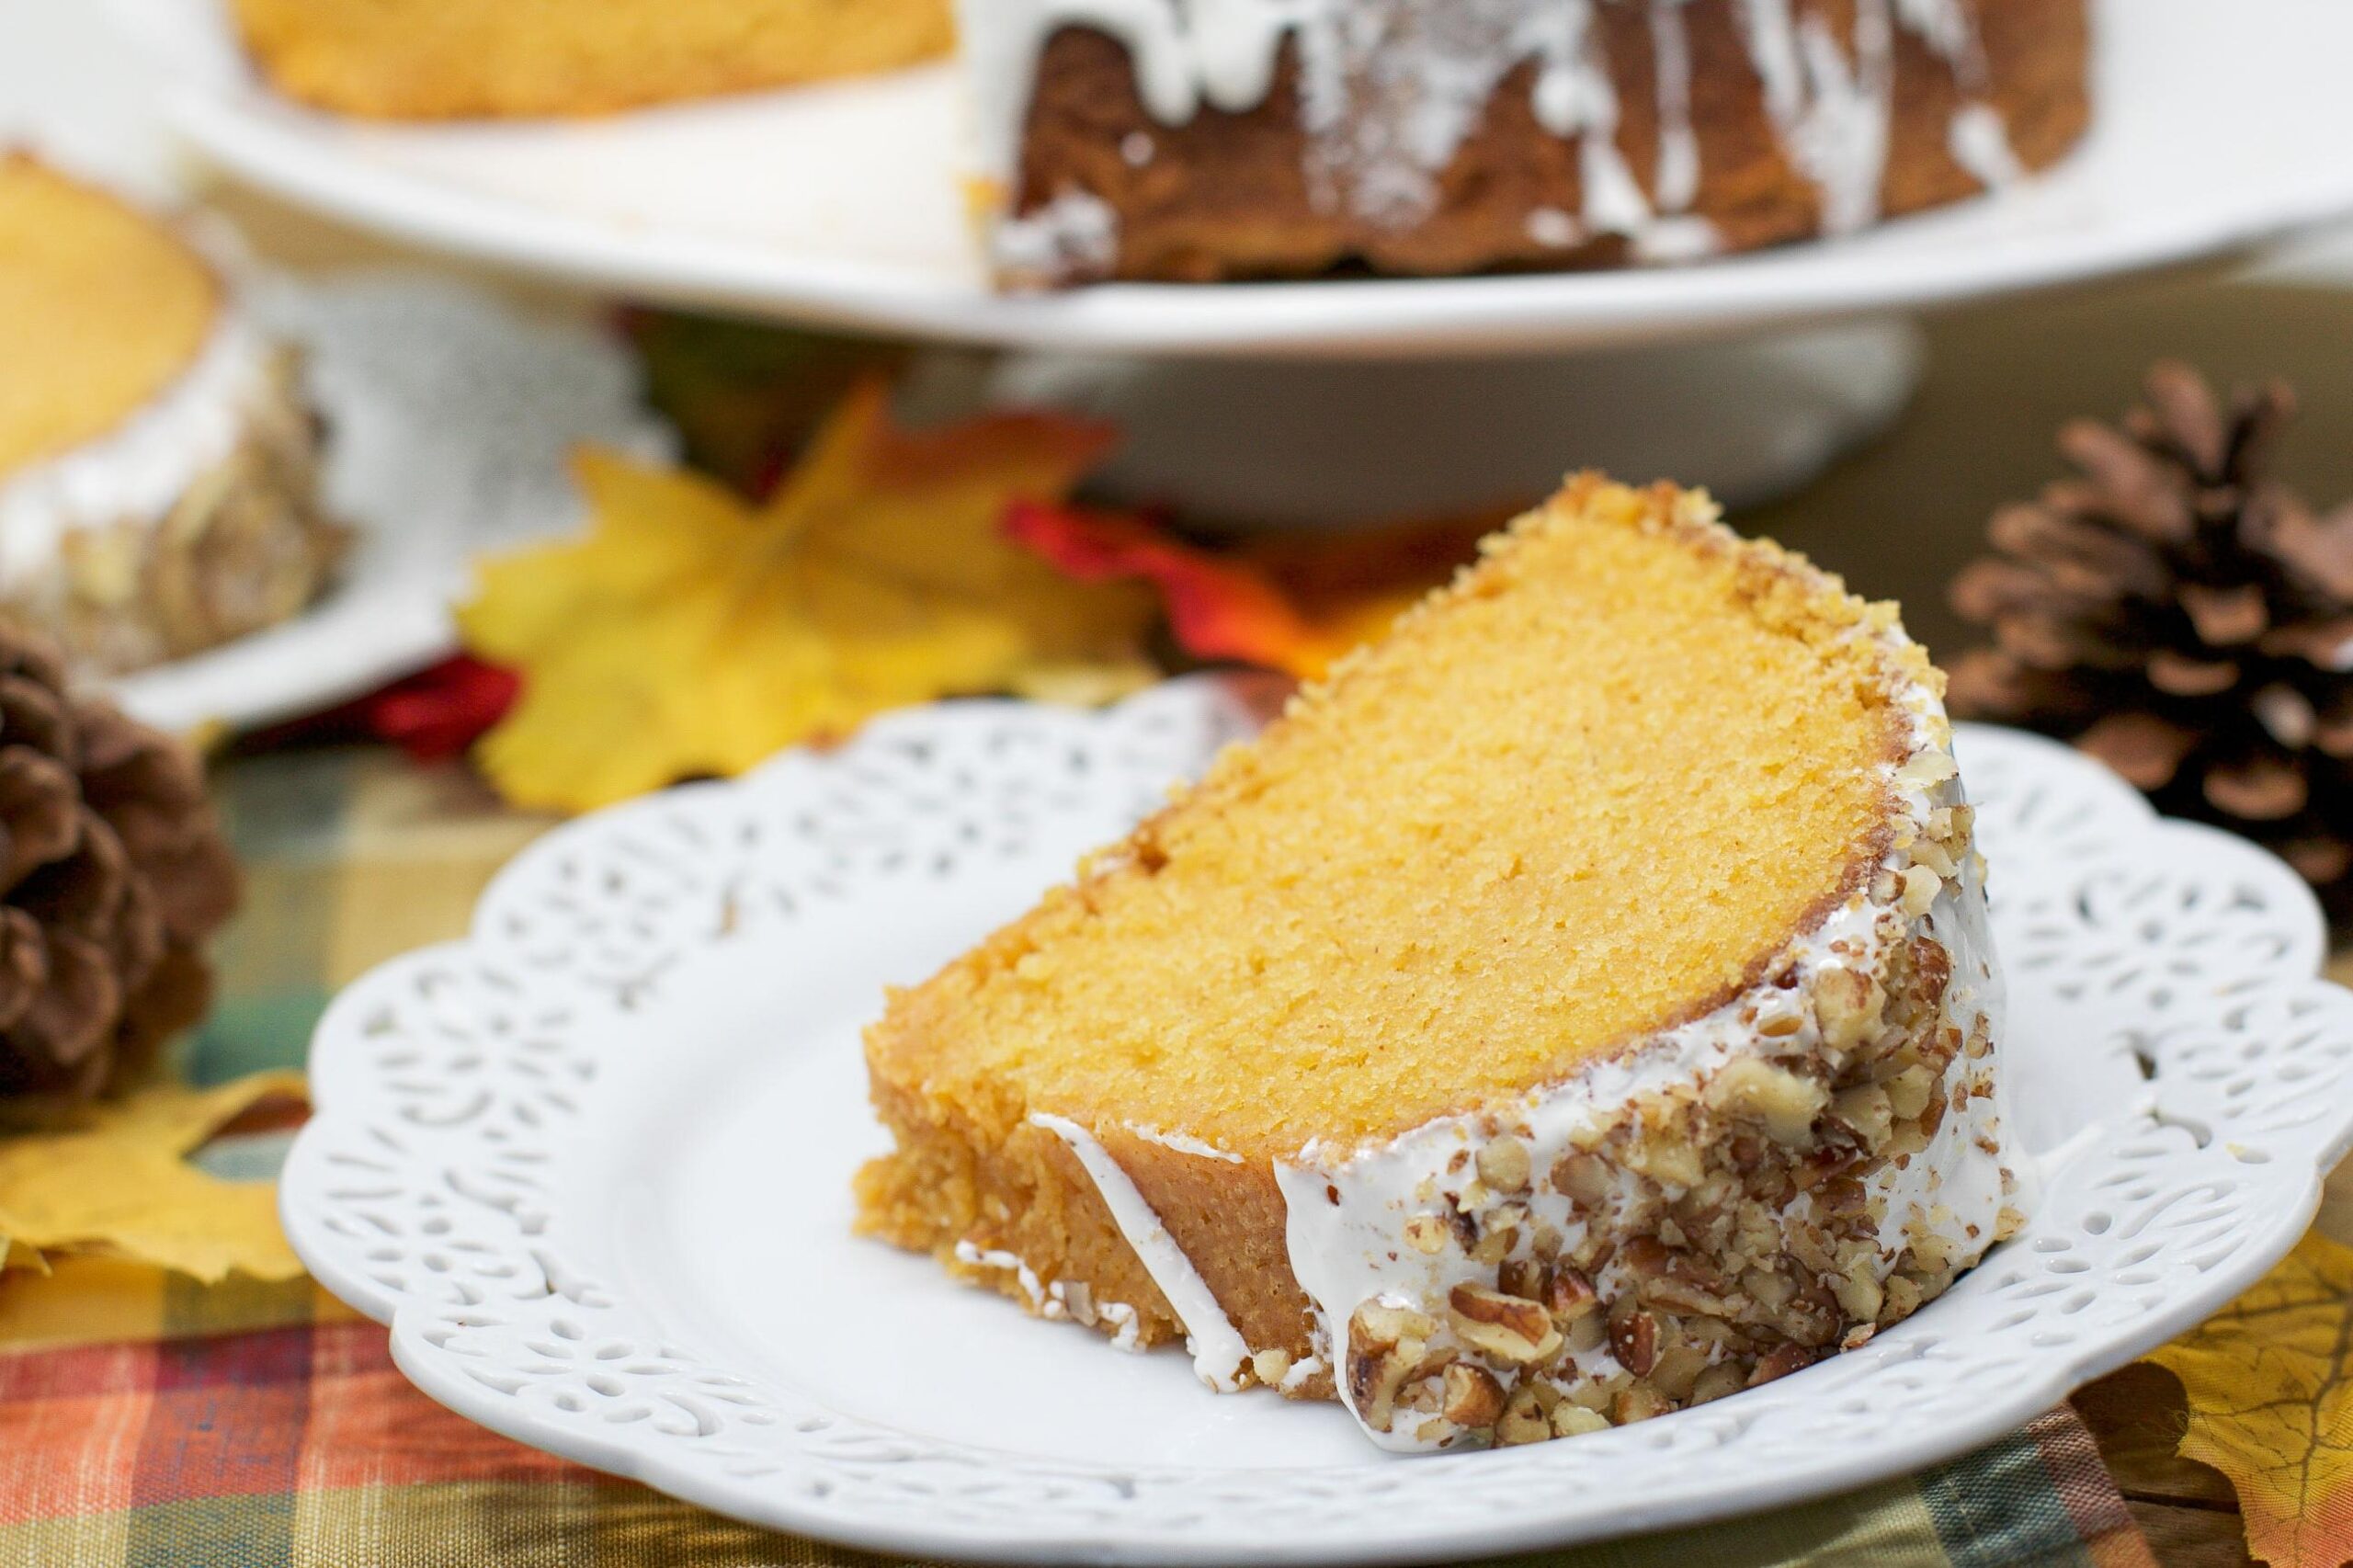  Get ready to indulge in the best sweet potato pound cake you’ve ever tasted.